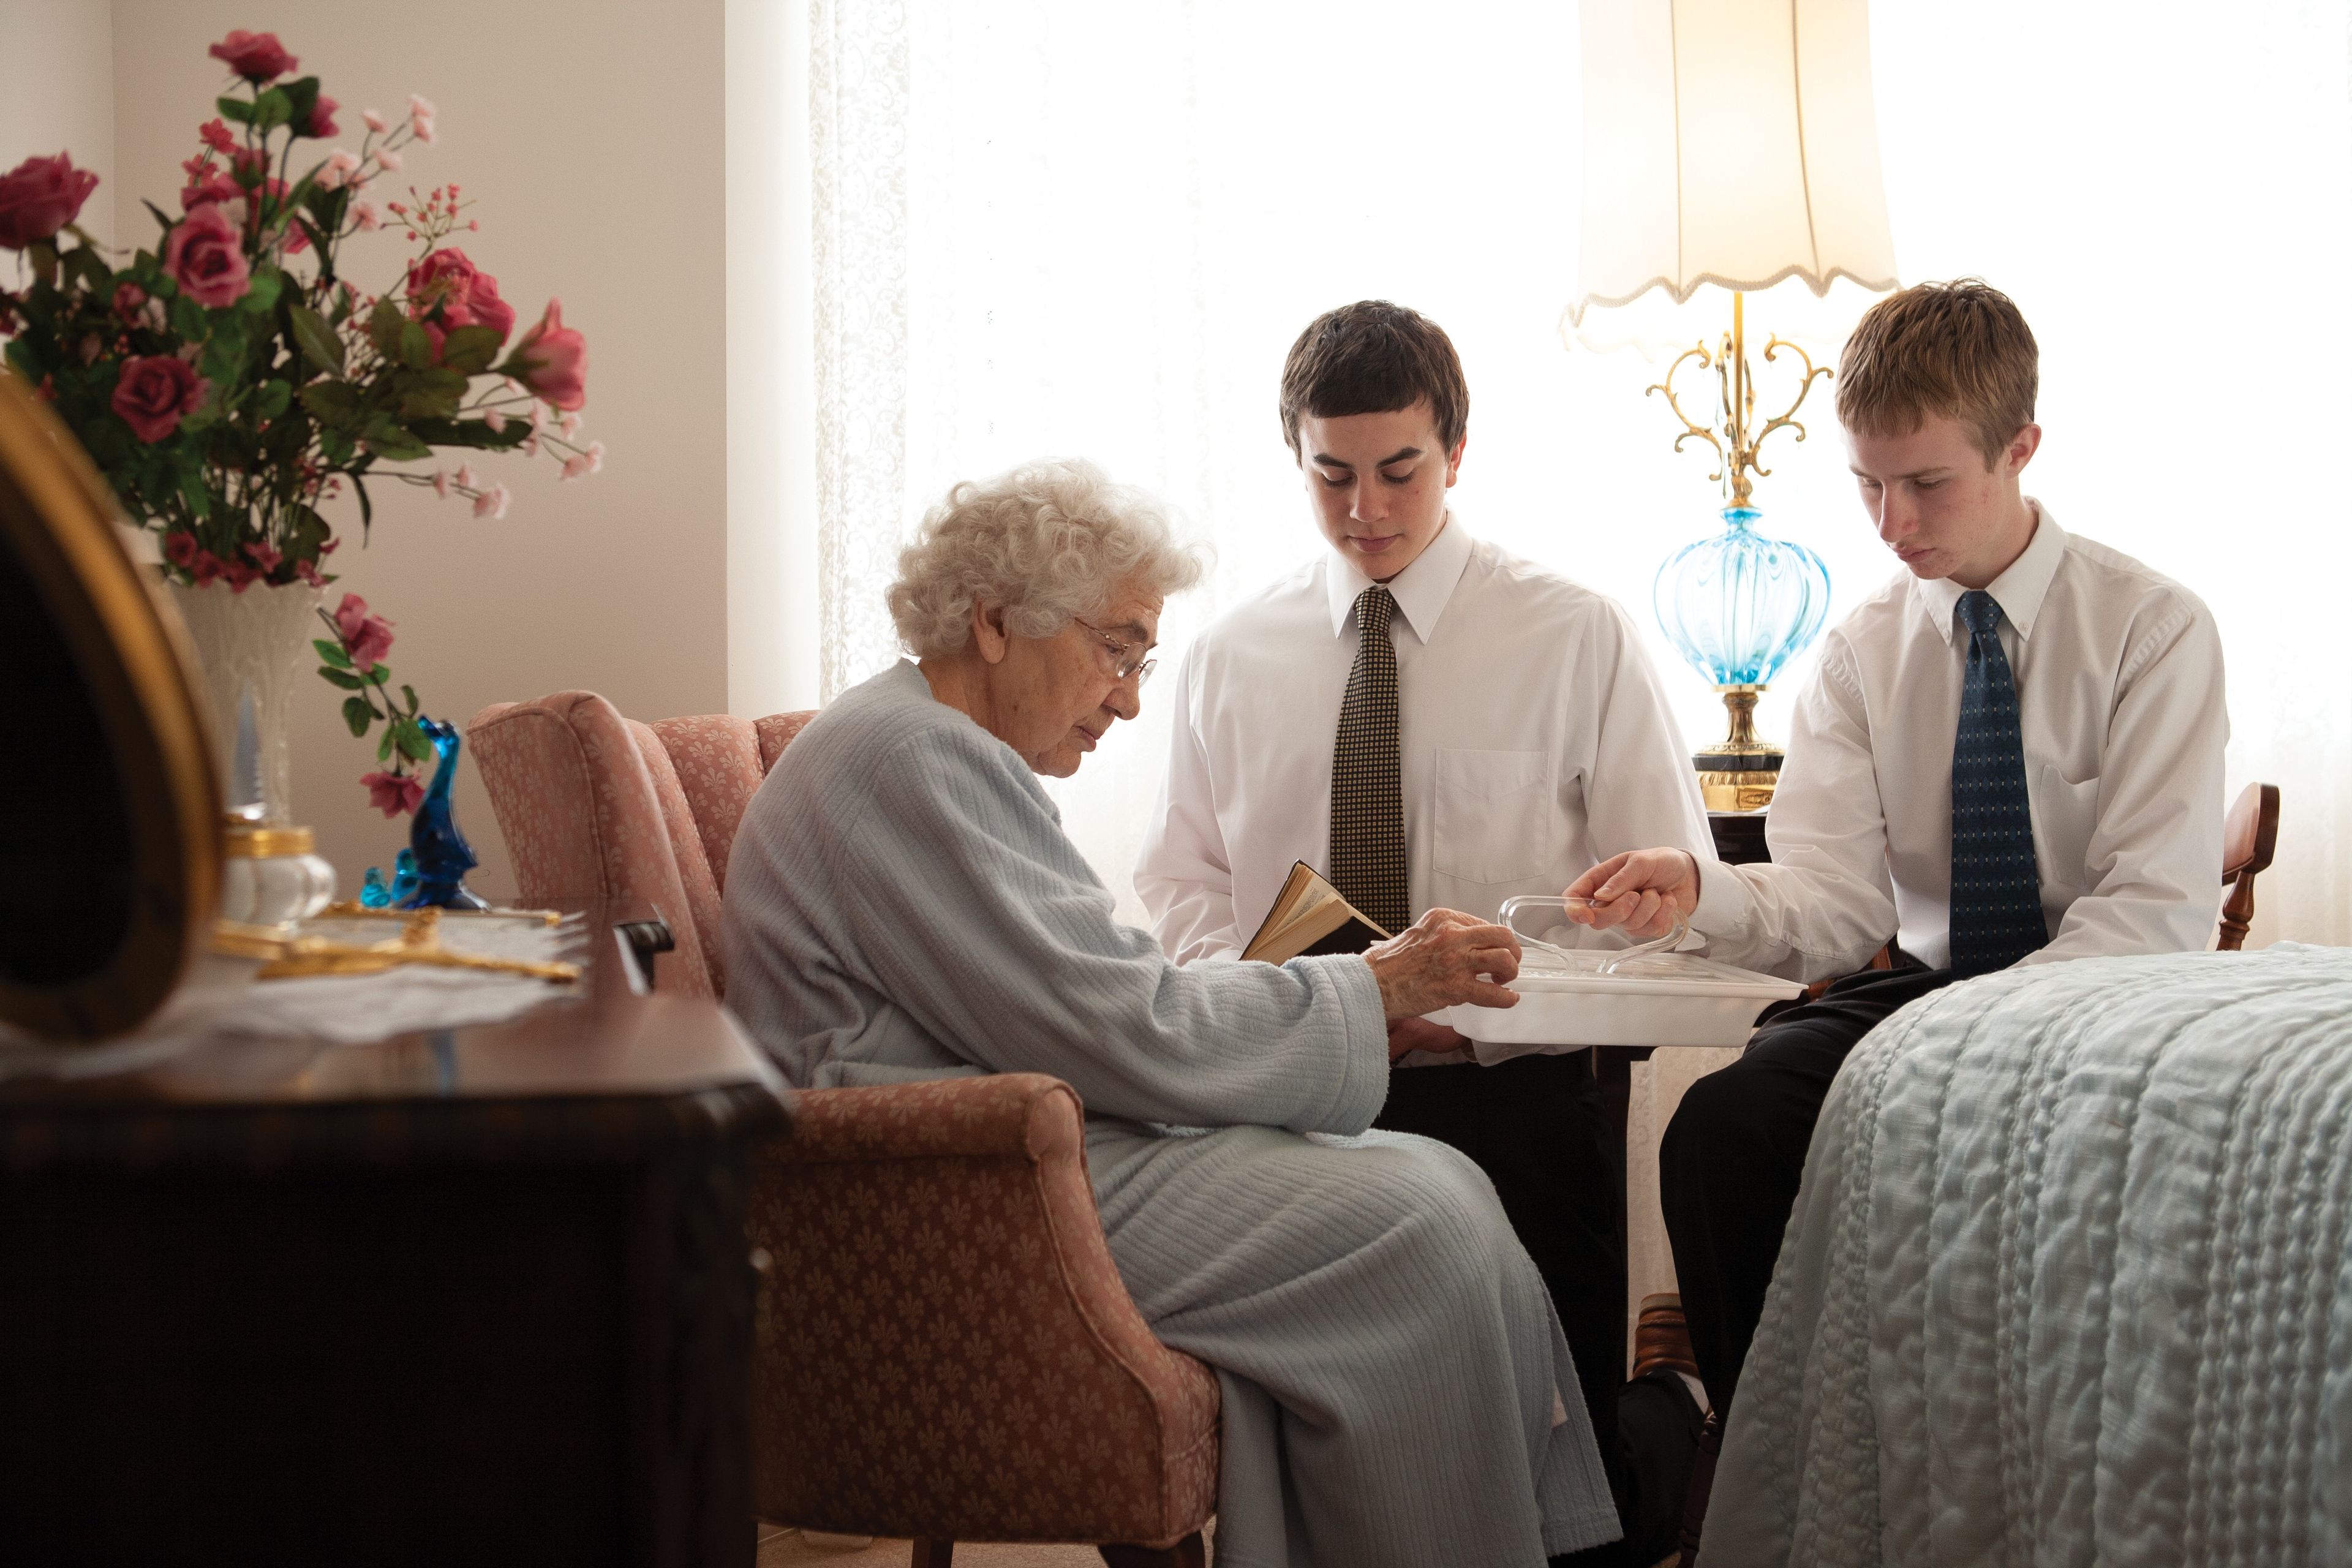 Two young men administering the sacrament to an elderly woman in her home.